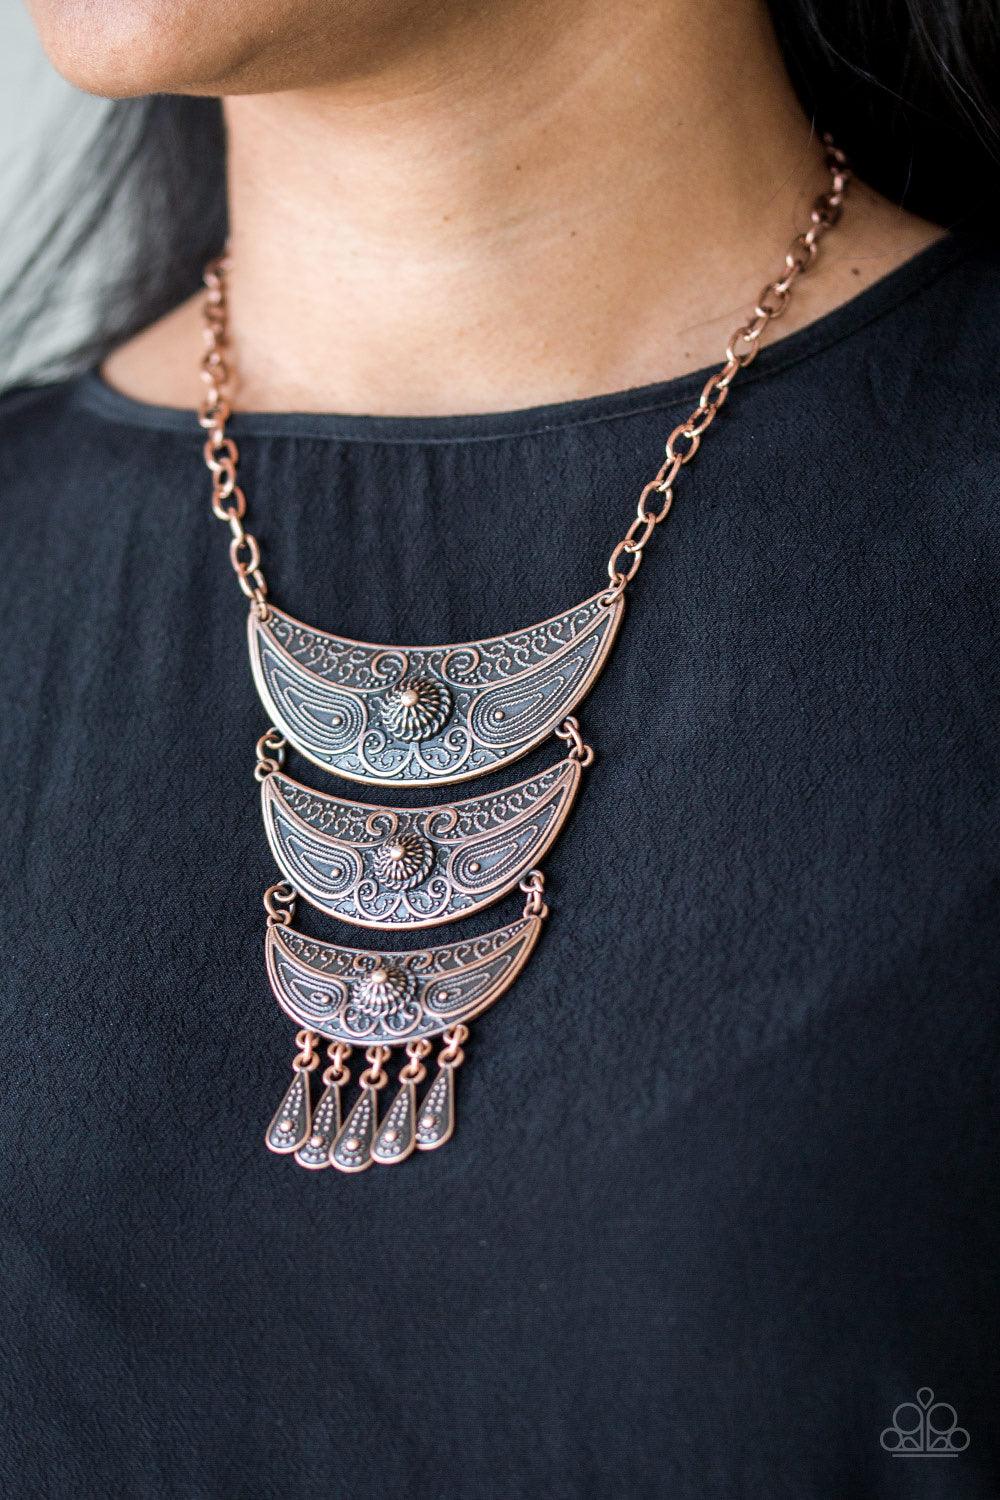 Paparazzi Accessories Go STEER -Crazy - Copper Gradually decreasing in size down the chest, decorative copper crescent plates connect into a bold pendant. Dotted in dainty studs, teardrop copper frames swing from the bottom of the tribal inspired pendant